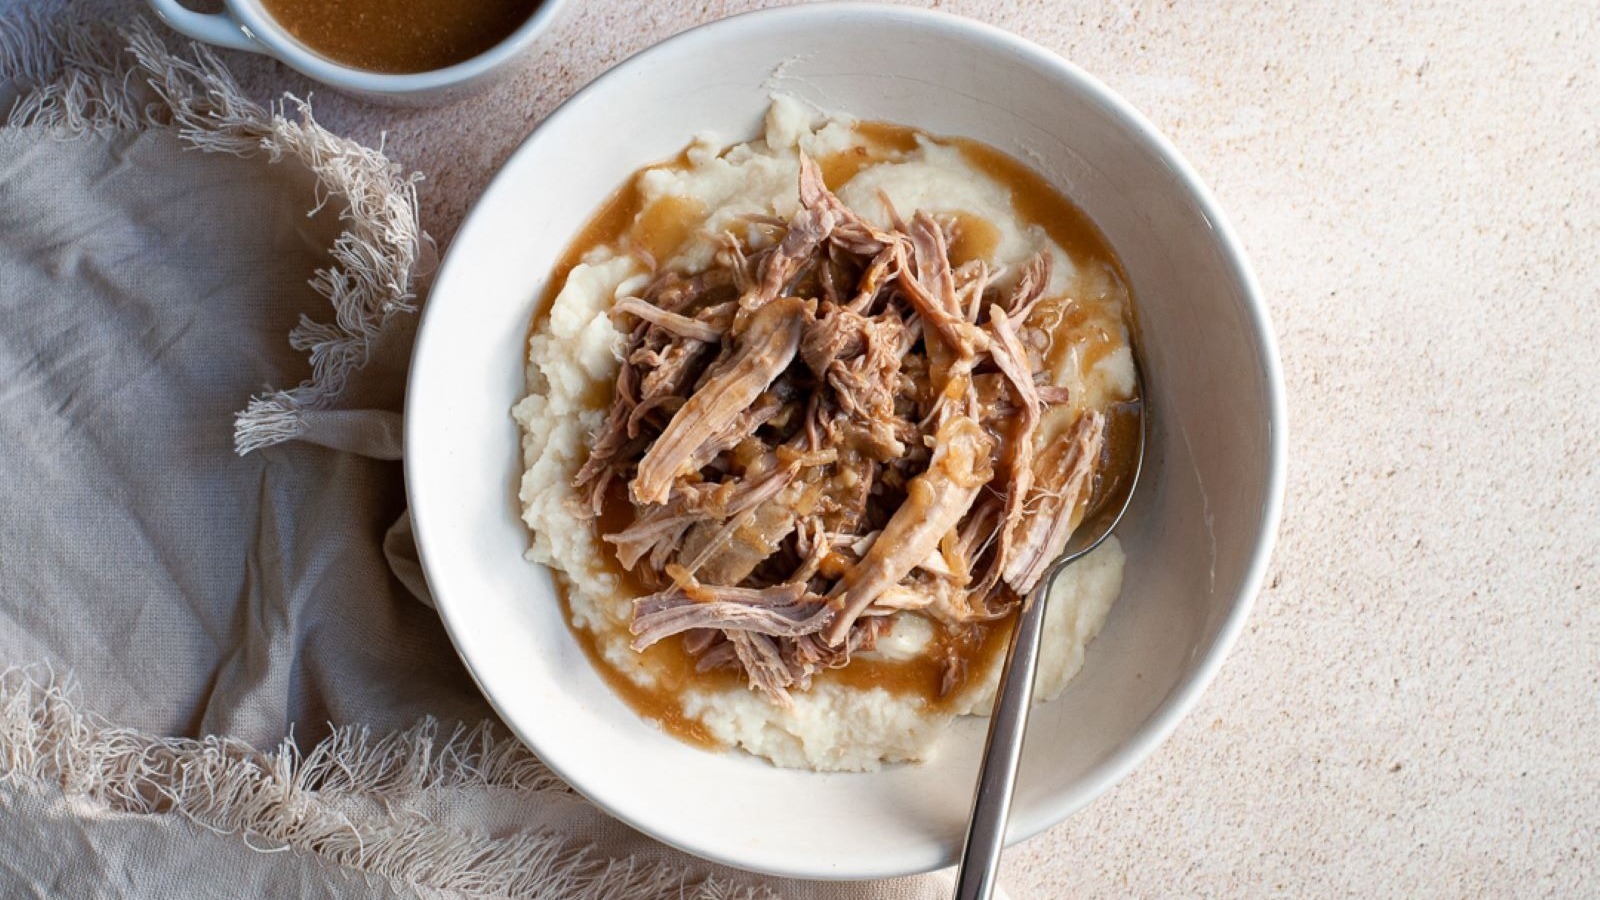 Tender Slow Cooked Pork With Onion Soup Mix Recipe - Mashed